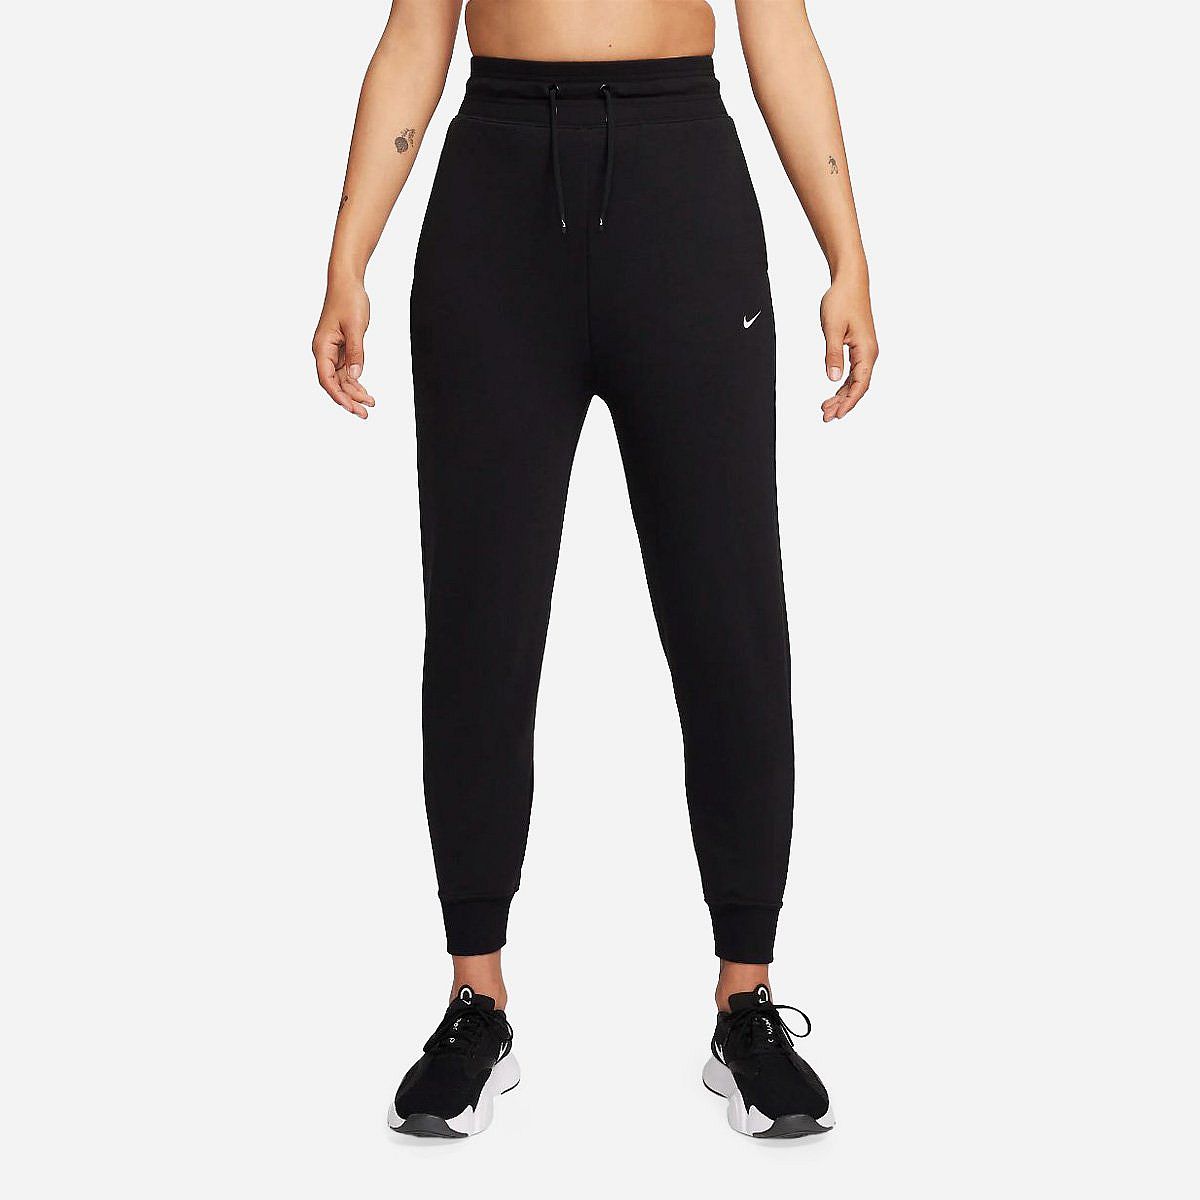 AN302471 W Nk One Df Jogger Pant